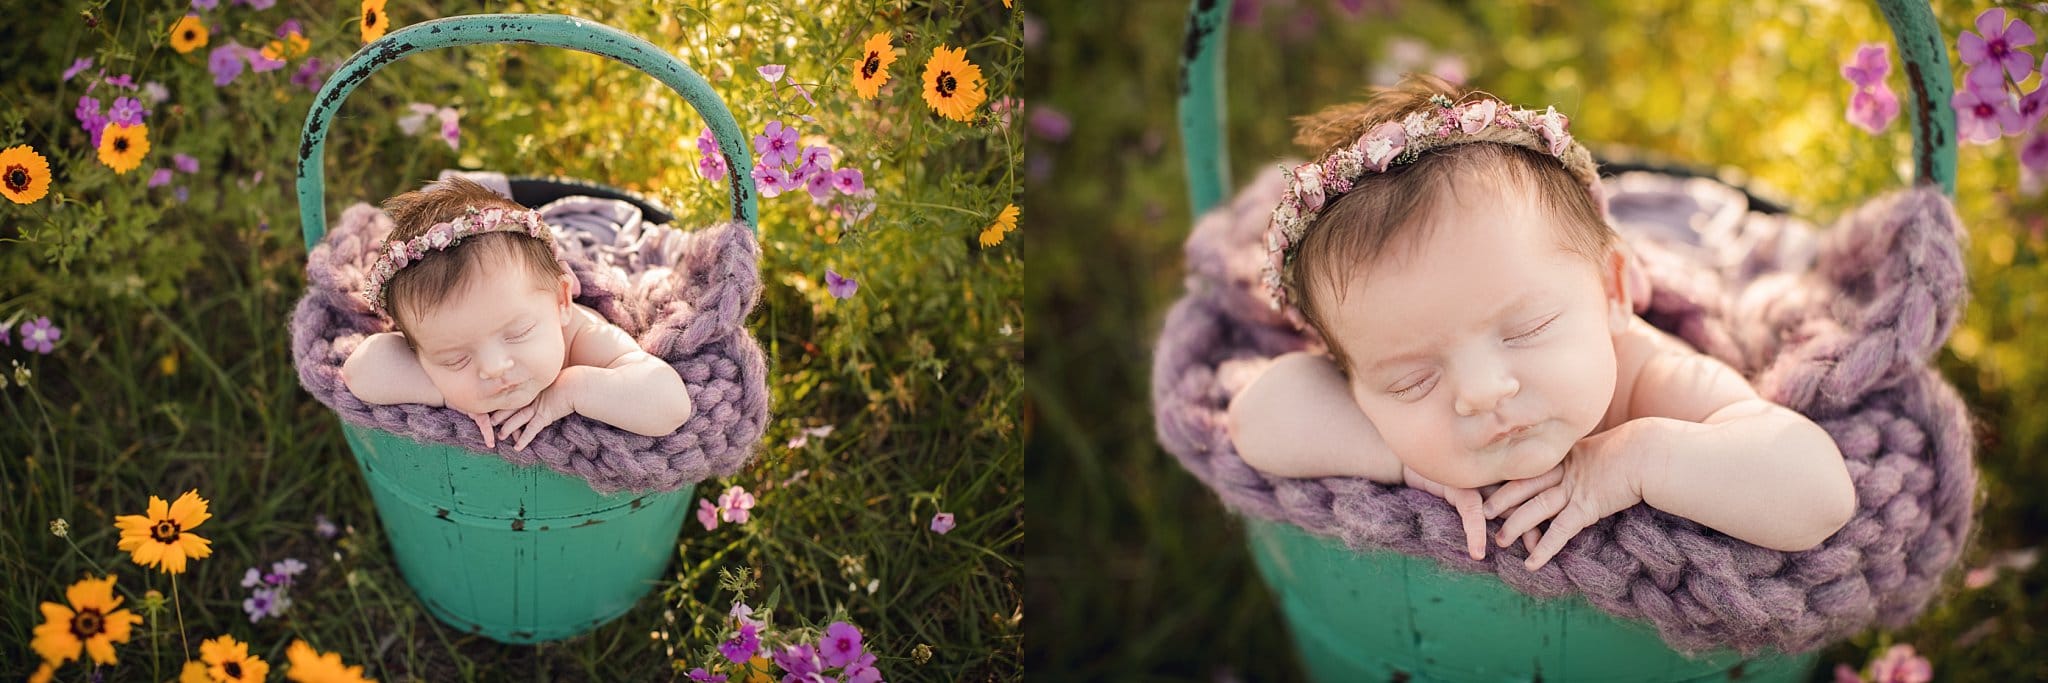 Outdoor Newborn Photographer Jacksonville Fl baby sleeping field of yellow and purple flowers Teal bucket with lavender blanket and floral crown